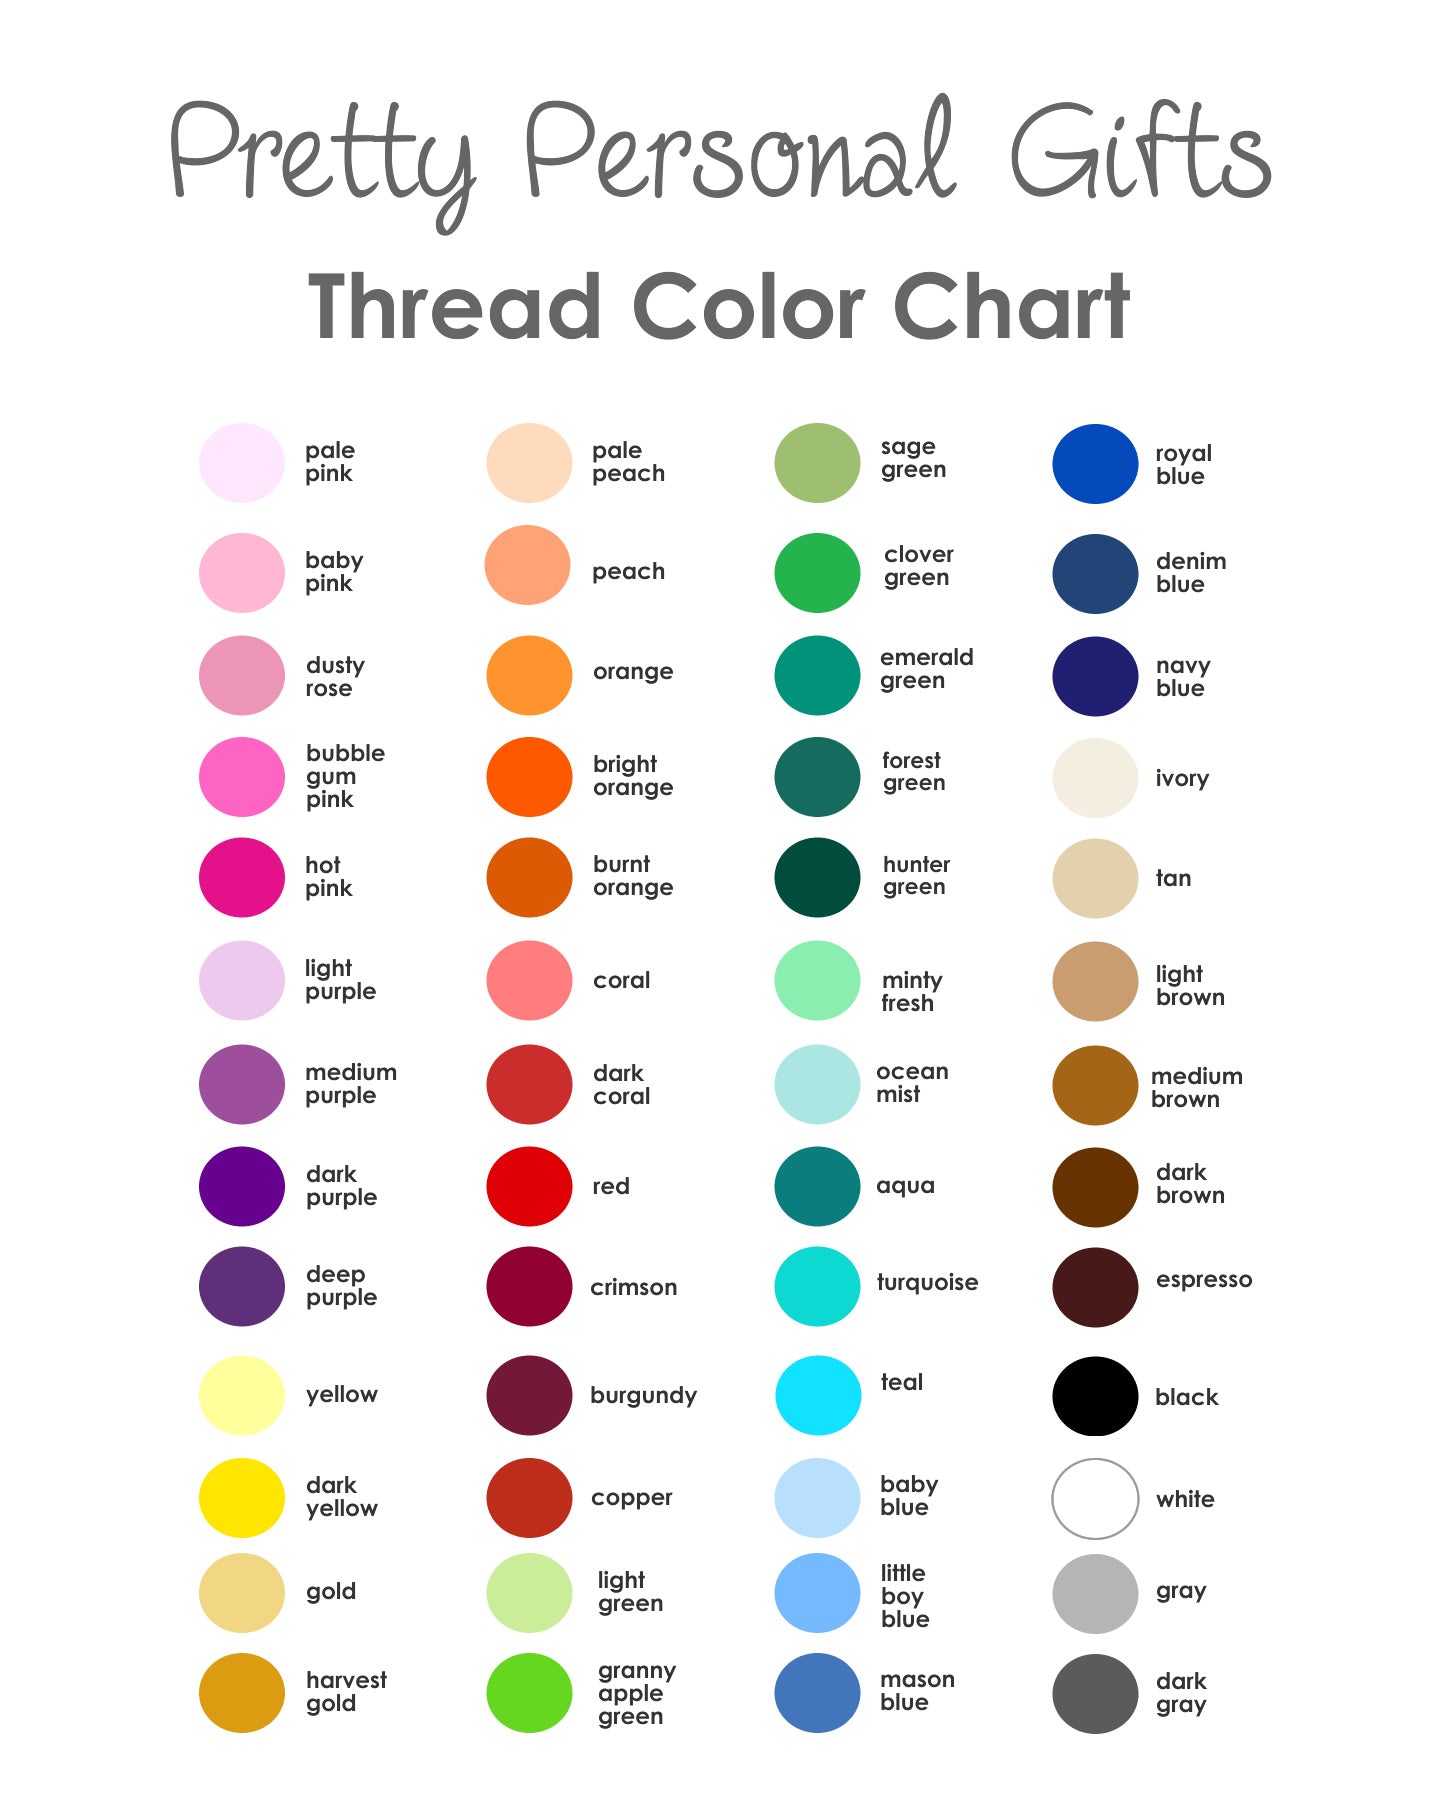 thread-color-chart-pretty-personal-gifts